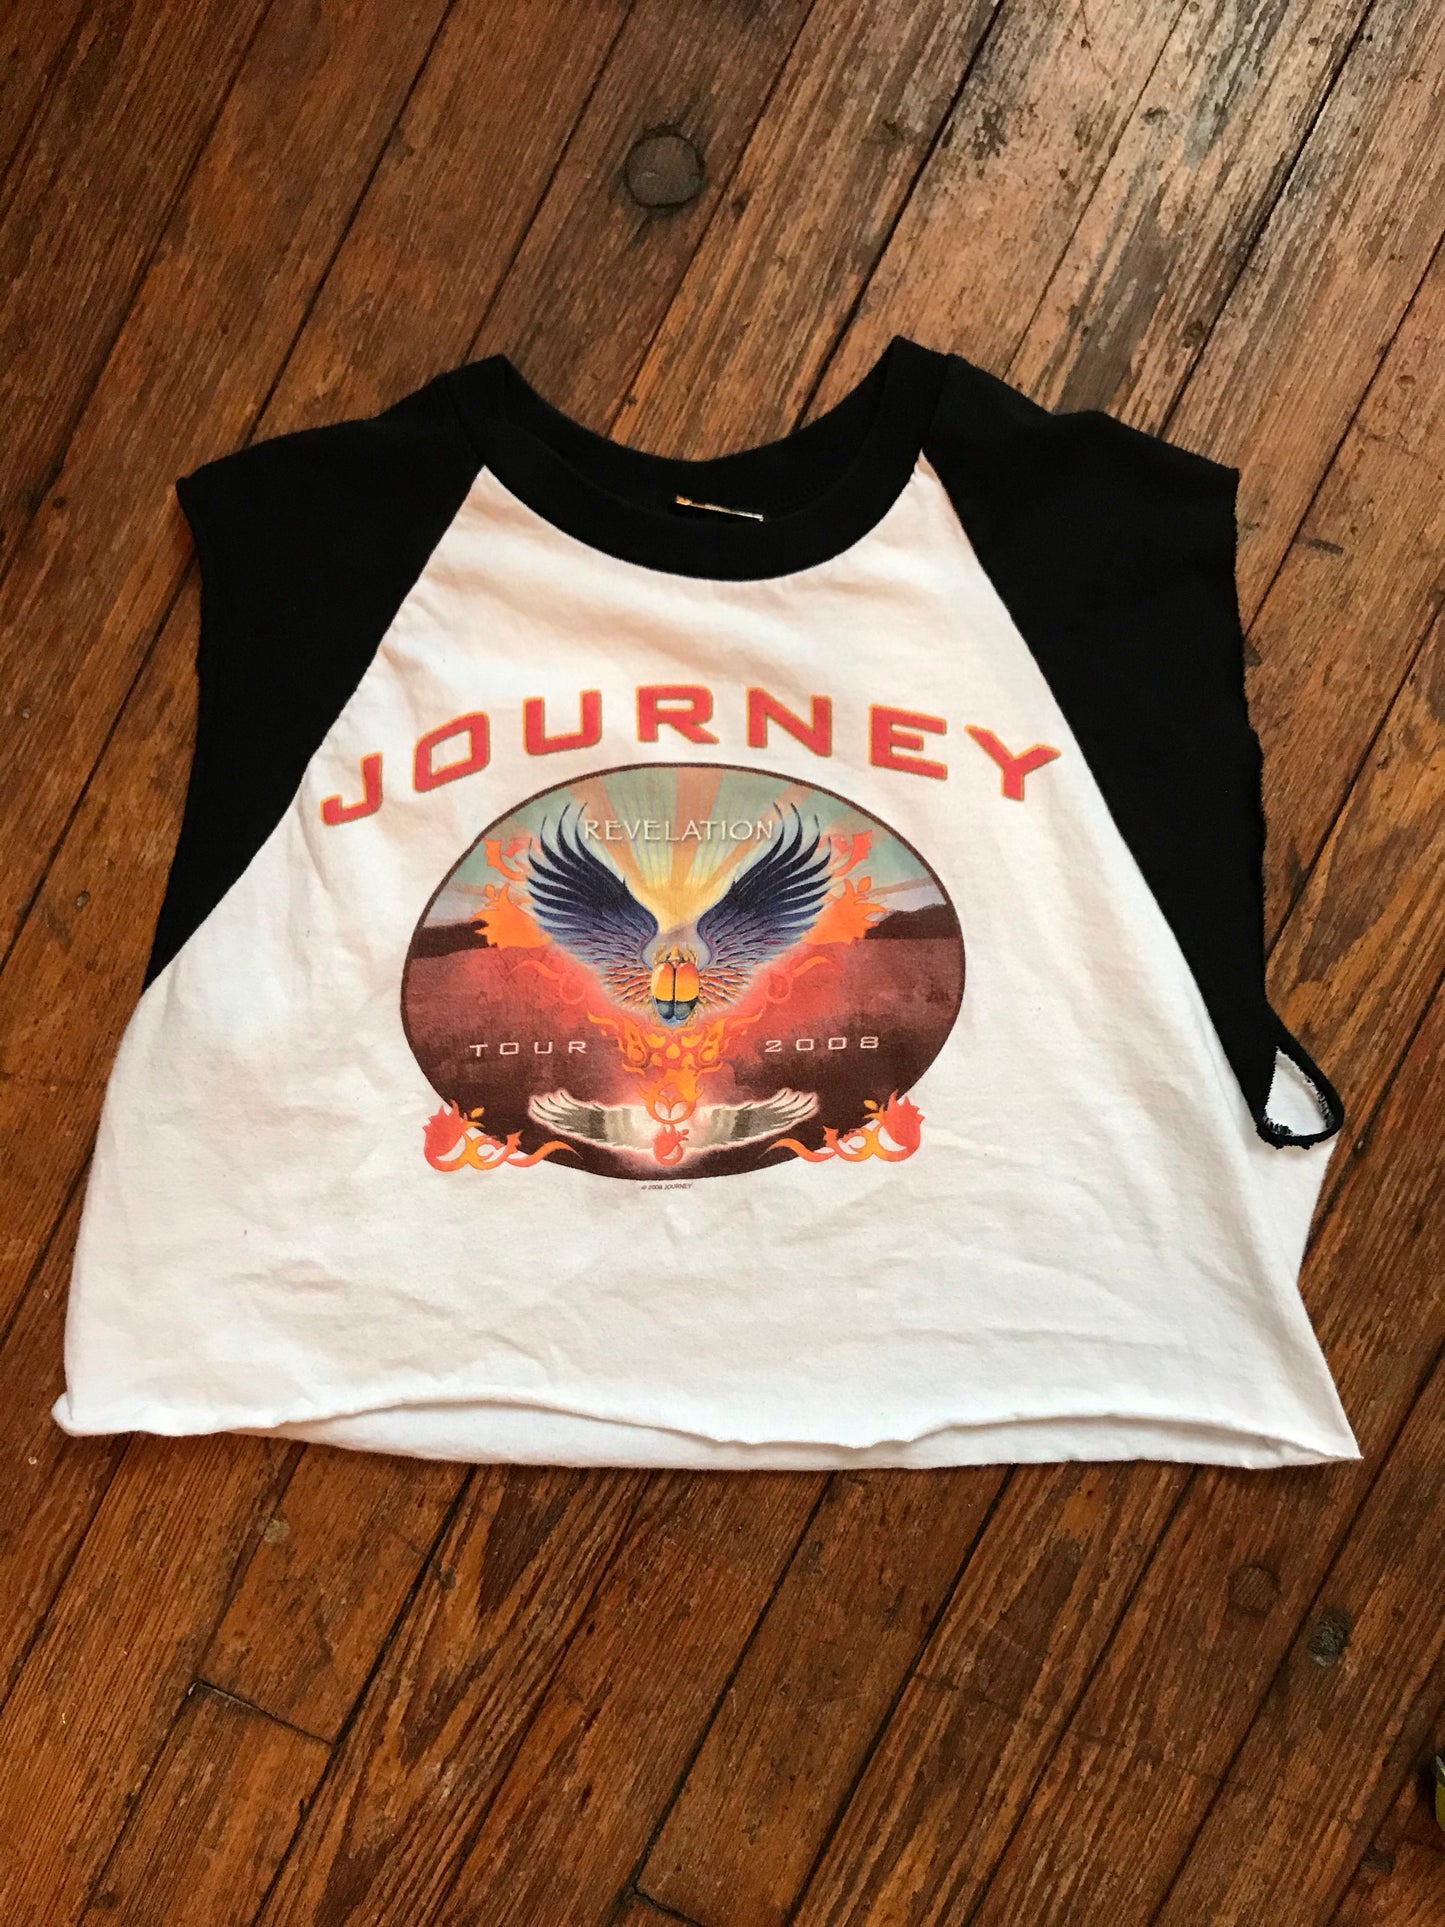 Journey 2008 Cropped Tour Shirt